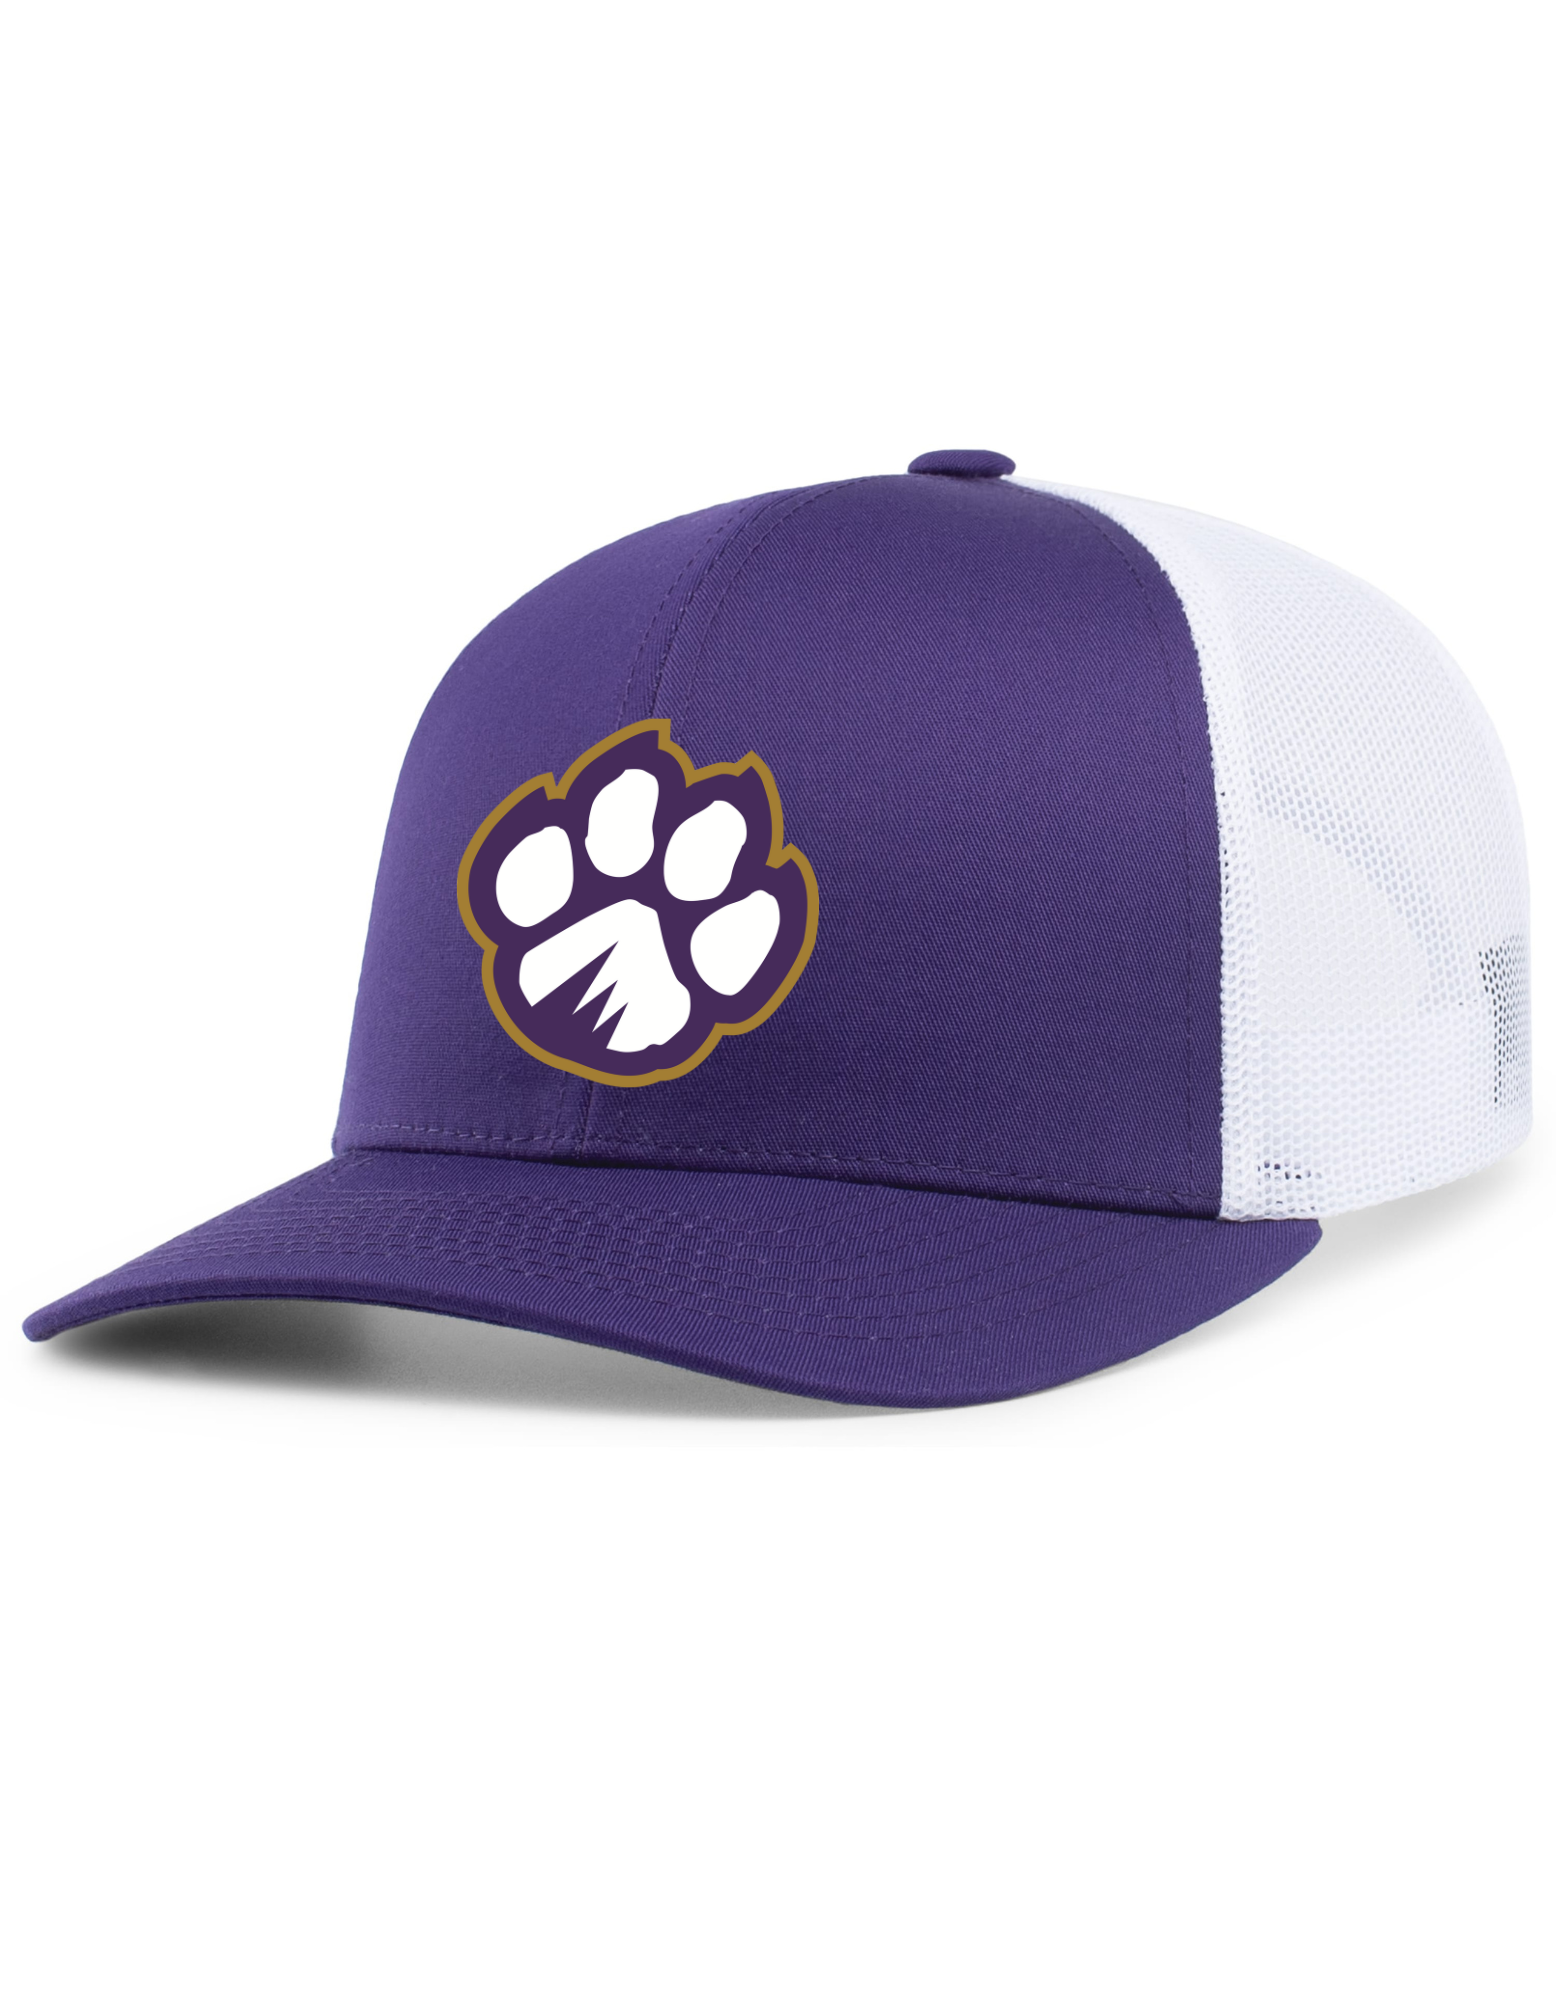 Tiger Head Snapback Fitted Hat - Purple/White